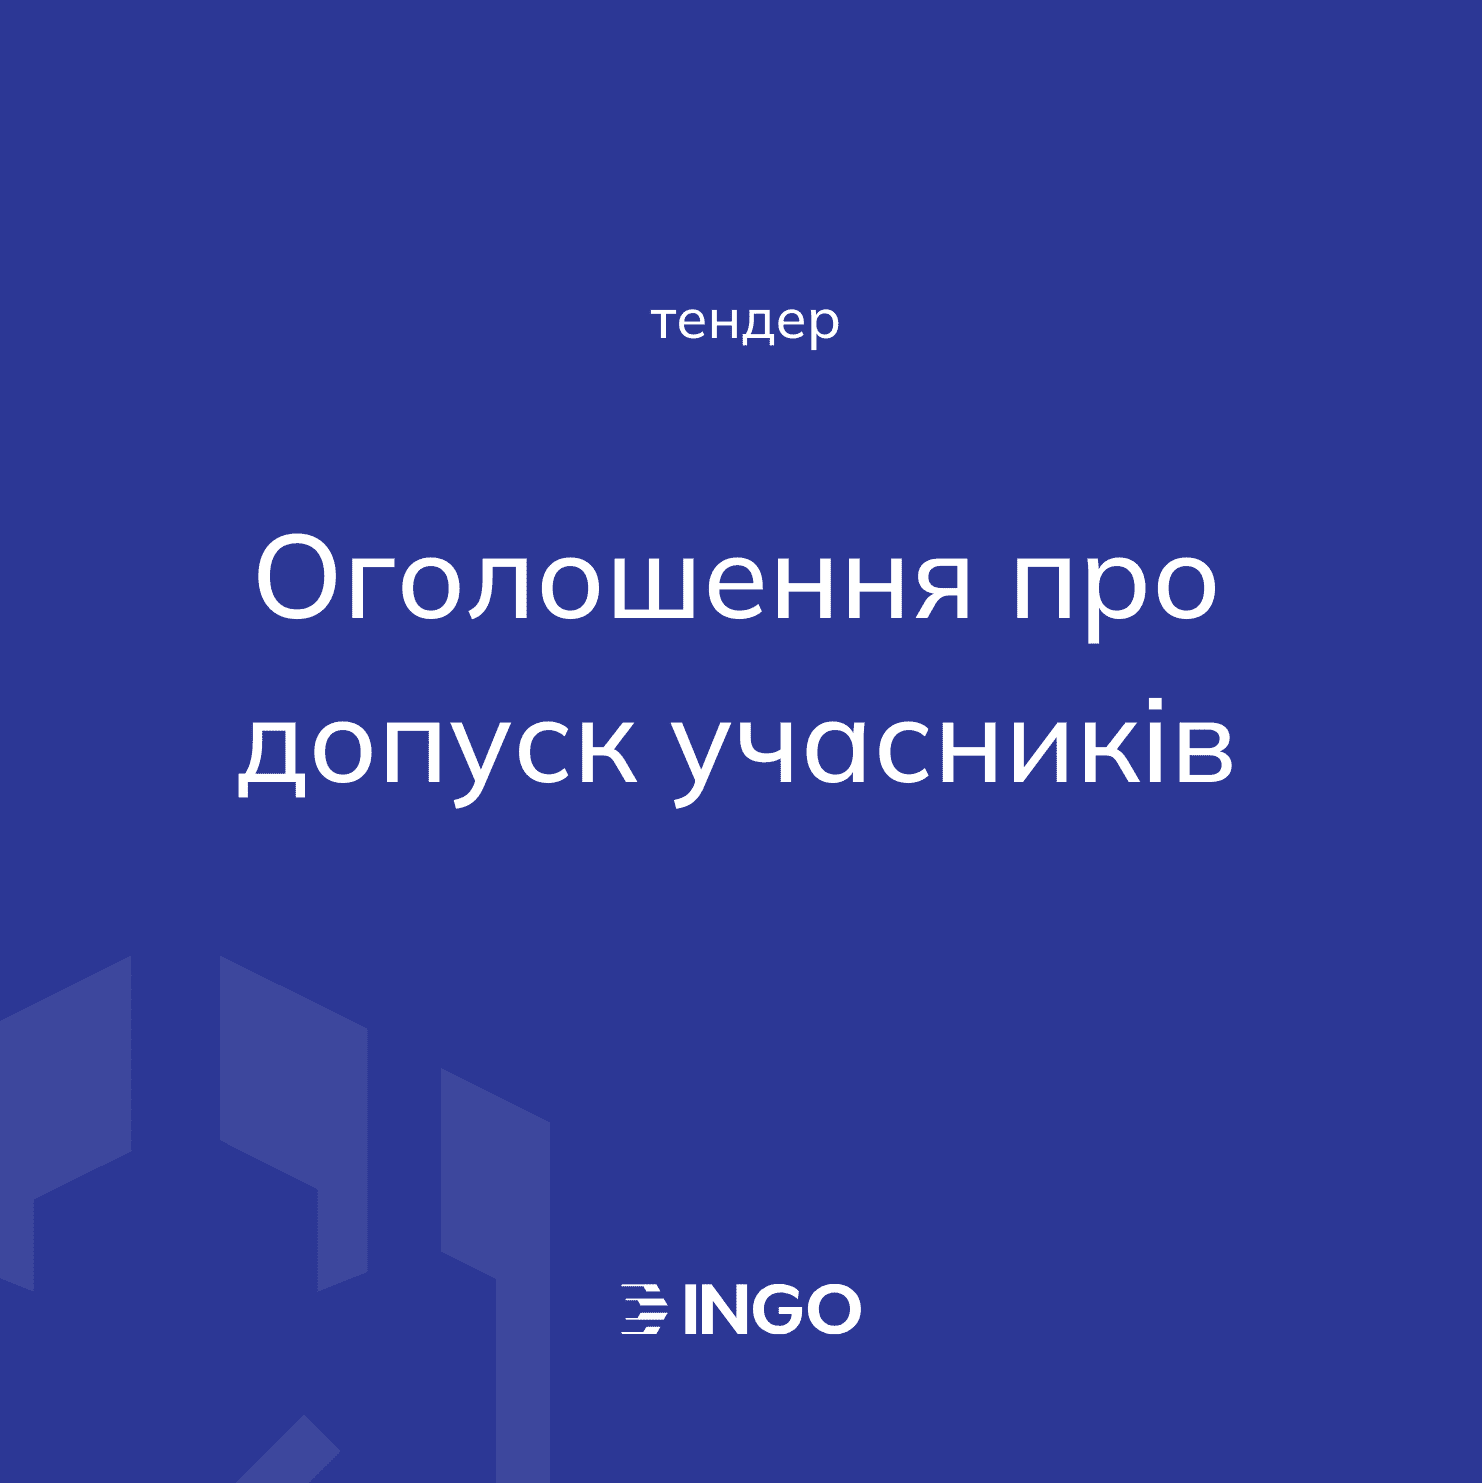 INGO tender for the selection of subjects of audit activity: announcement of the admission of participants